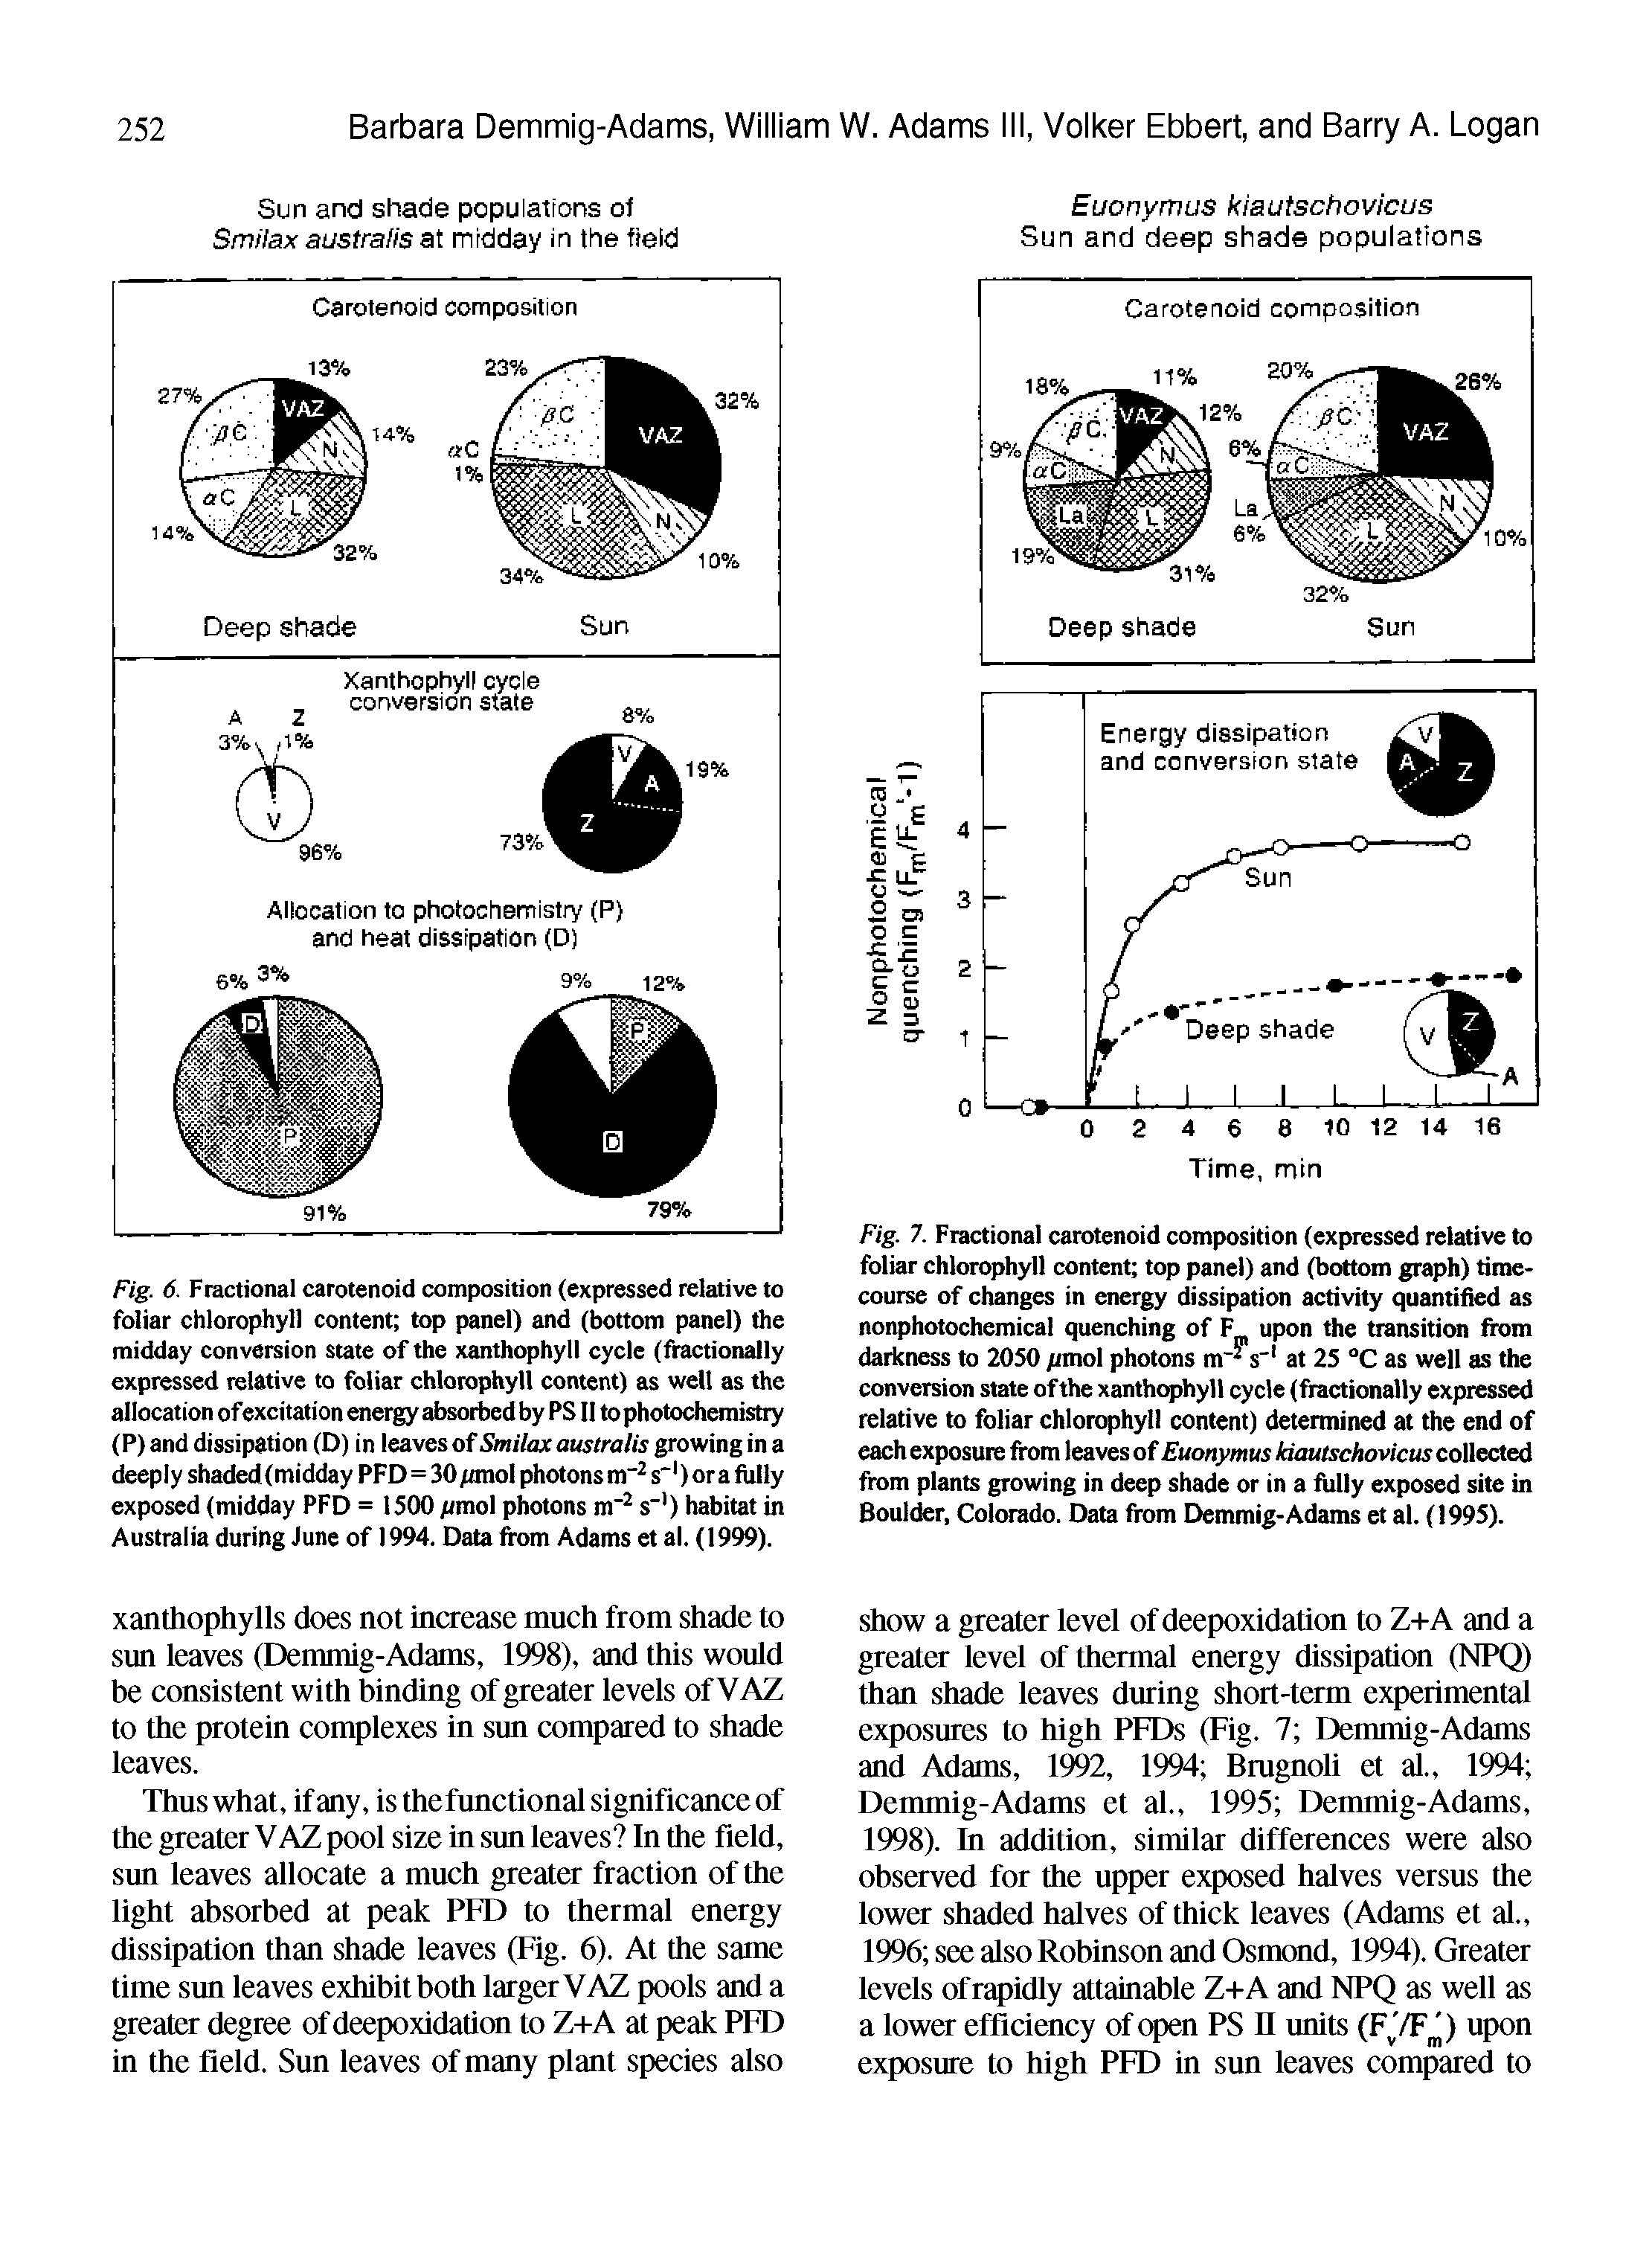 Fig. 6. Fractional carotenoid composition (expressed relative to foliar chlorophyll content top panel) and (bottom panel) the midday conversion state of the xanthophyll cycle (fractionally expressed relative to foliar chlorophyll content) as well as the allocation of excitation energy absorbed by PS II to photochemistry (P) and dissipation (D) in leaves of Smilax australis growing in a deeply shaded (midday PFD=30 miol photons m" s ) or a fully exposed (midday PFD = 1500 /imol photons m" s" ) habitat in Australia during June of 1994. Data from Adams et al. (1999).